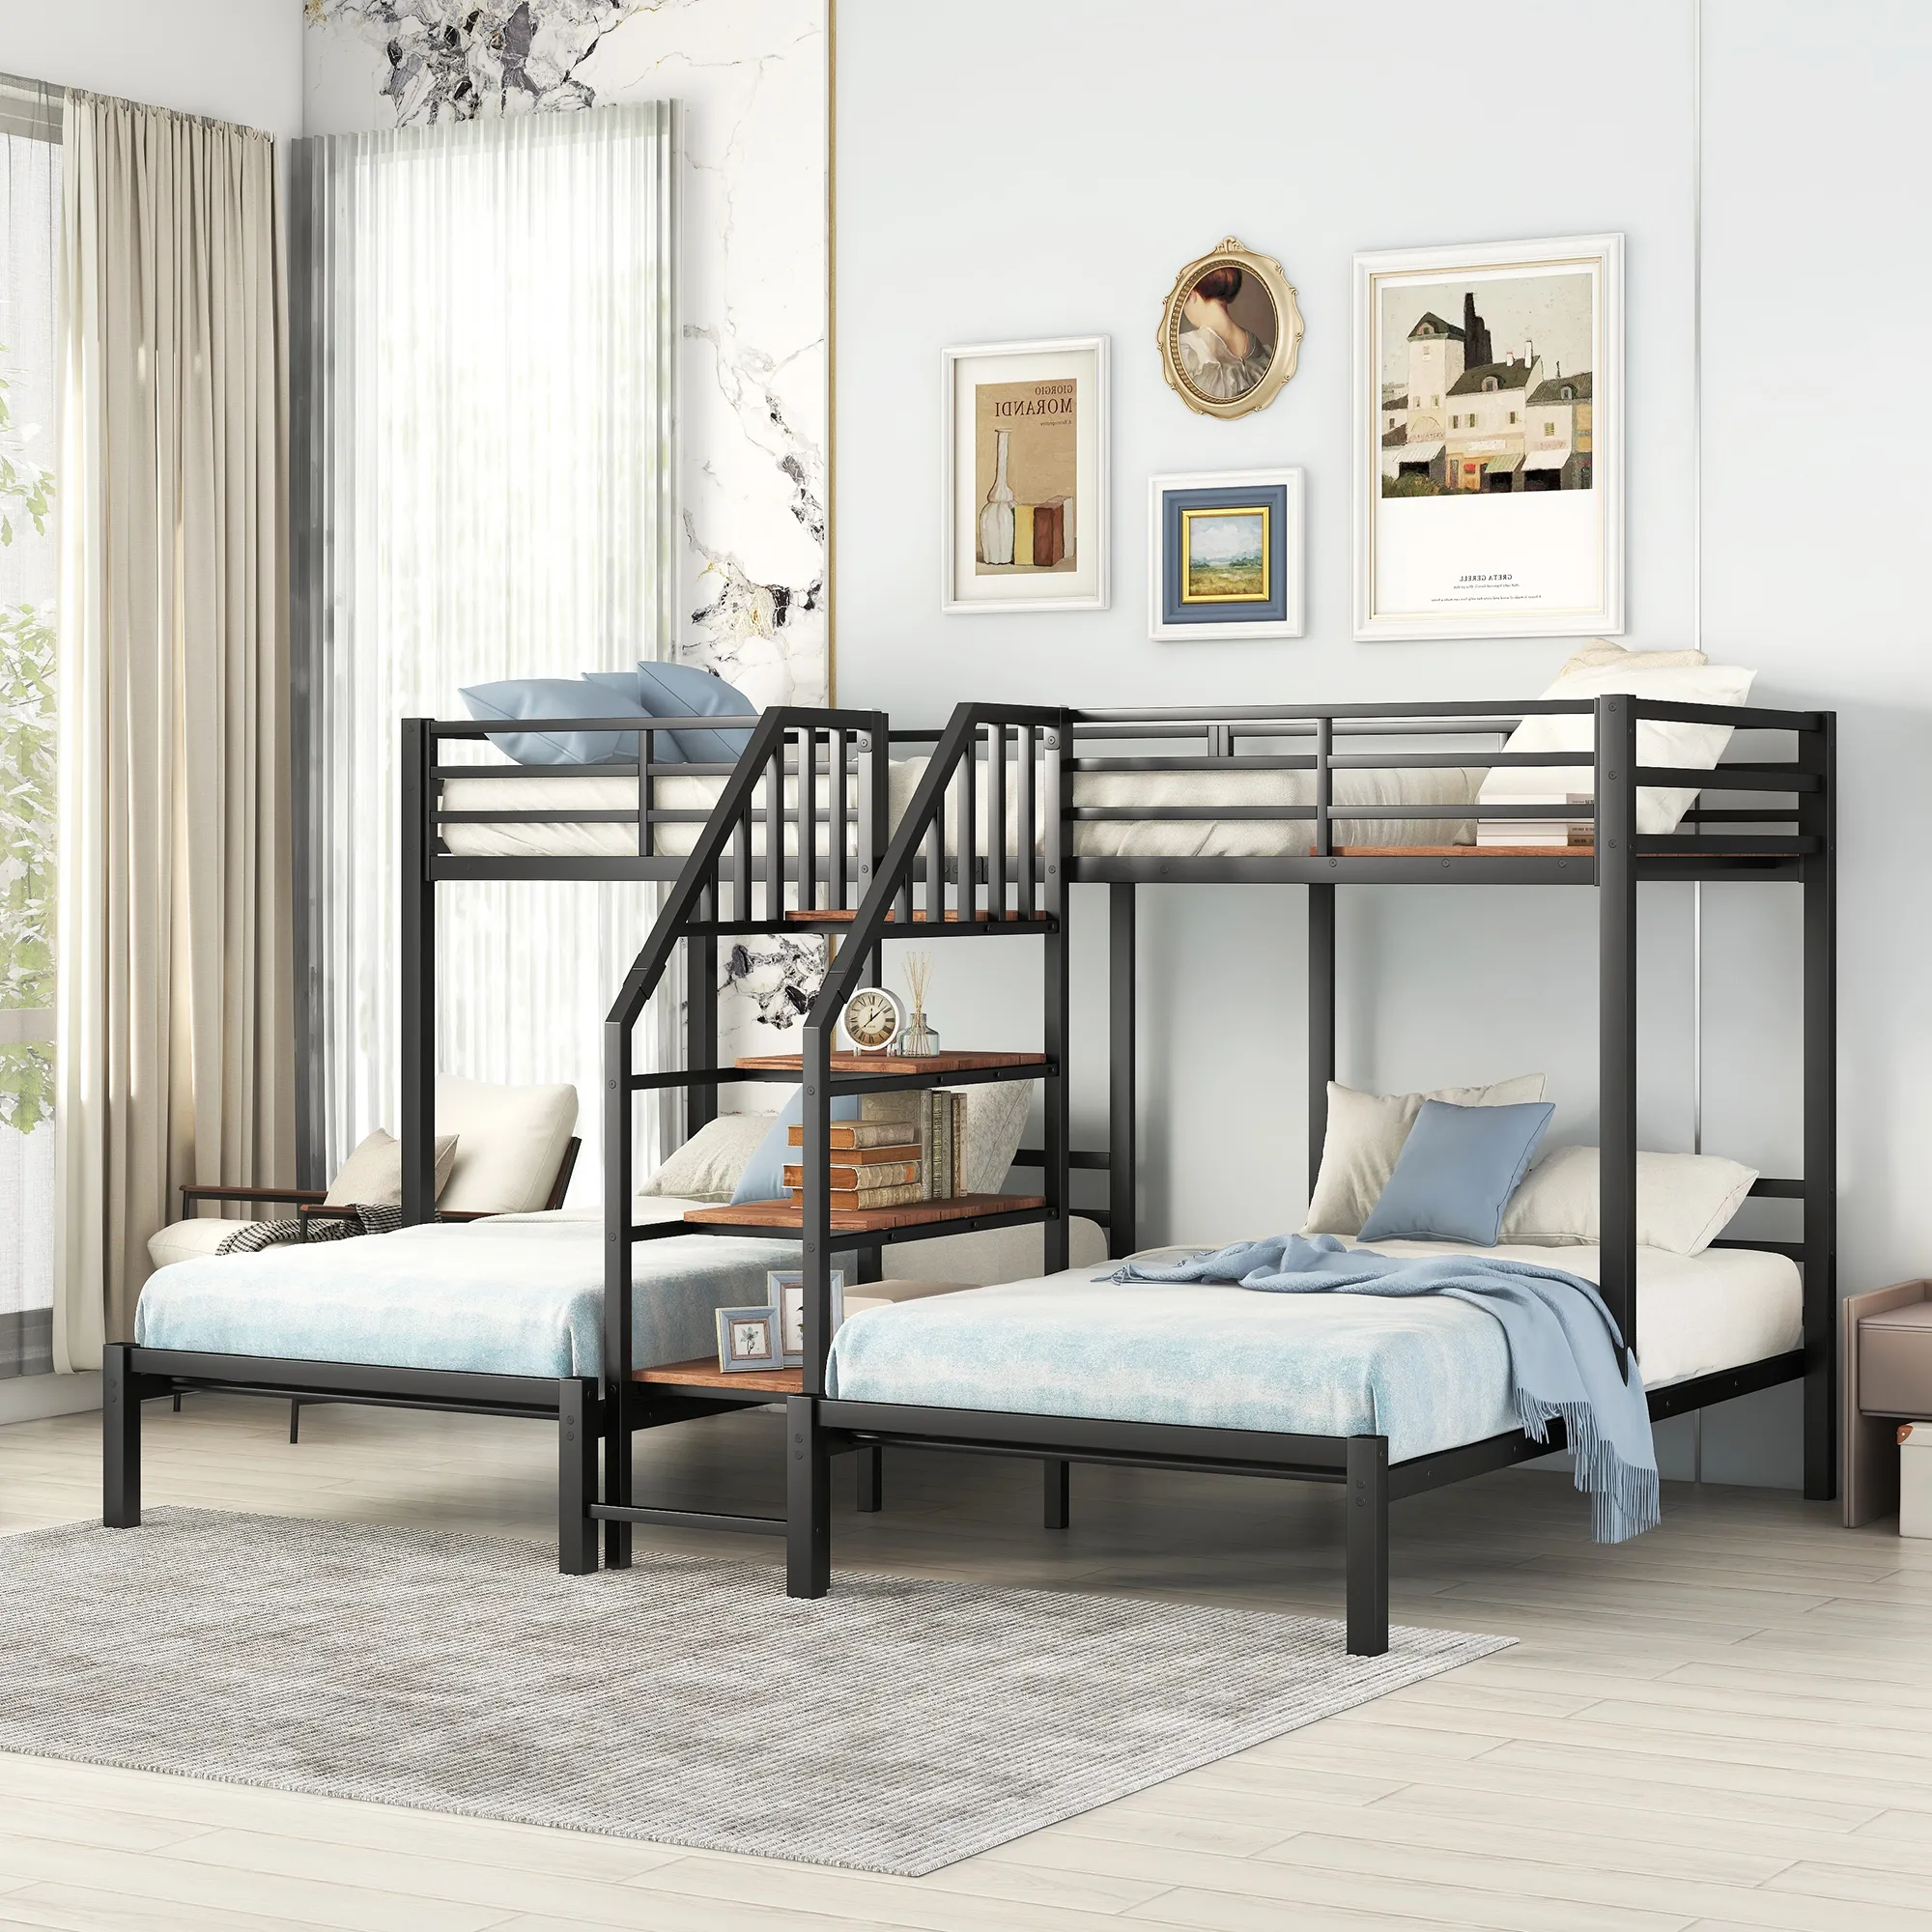 Merax Triple Bunk Bed with Storage Shelves